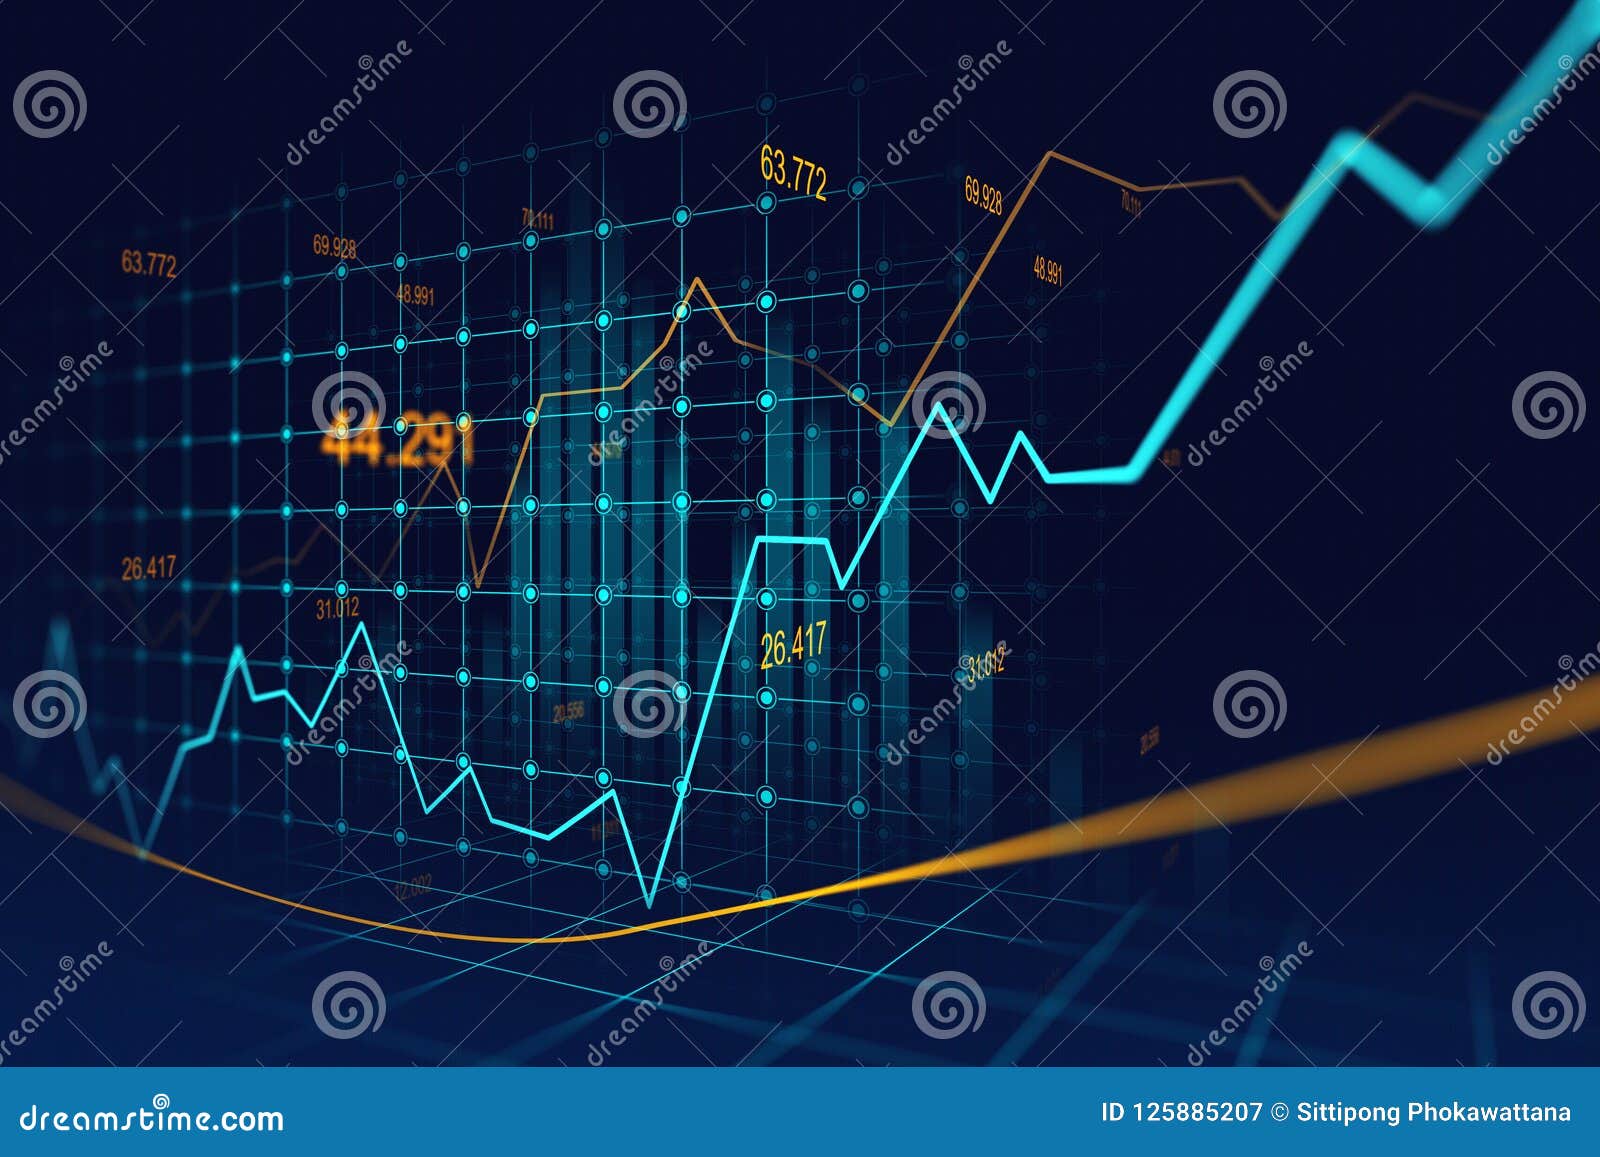 stock market or forex trading graph in graphic concept